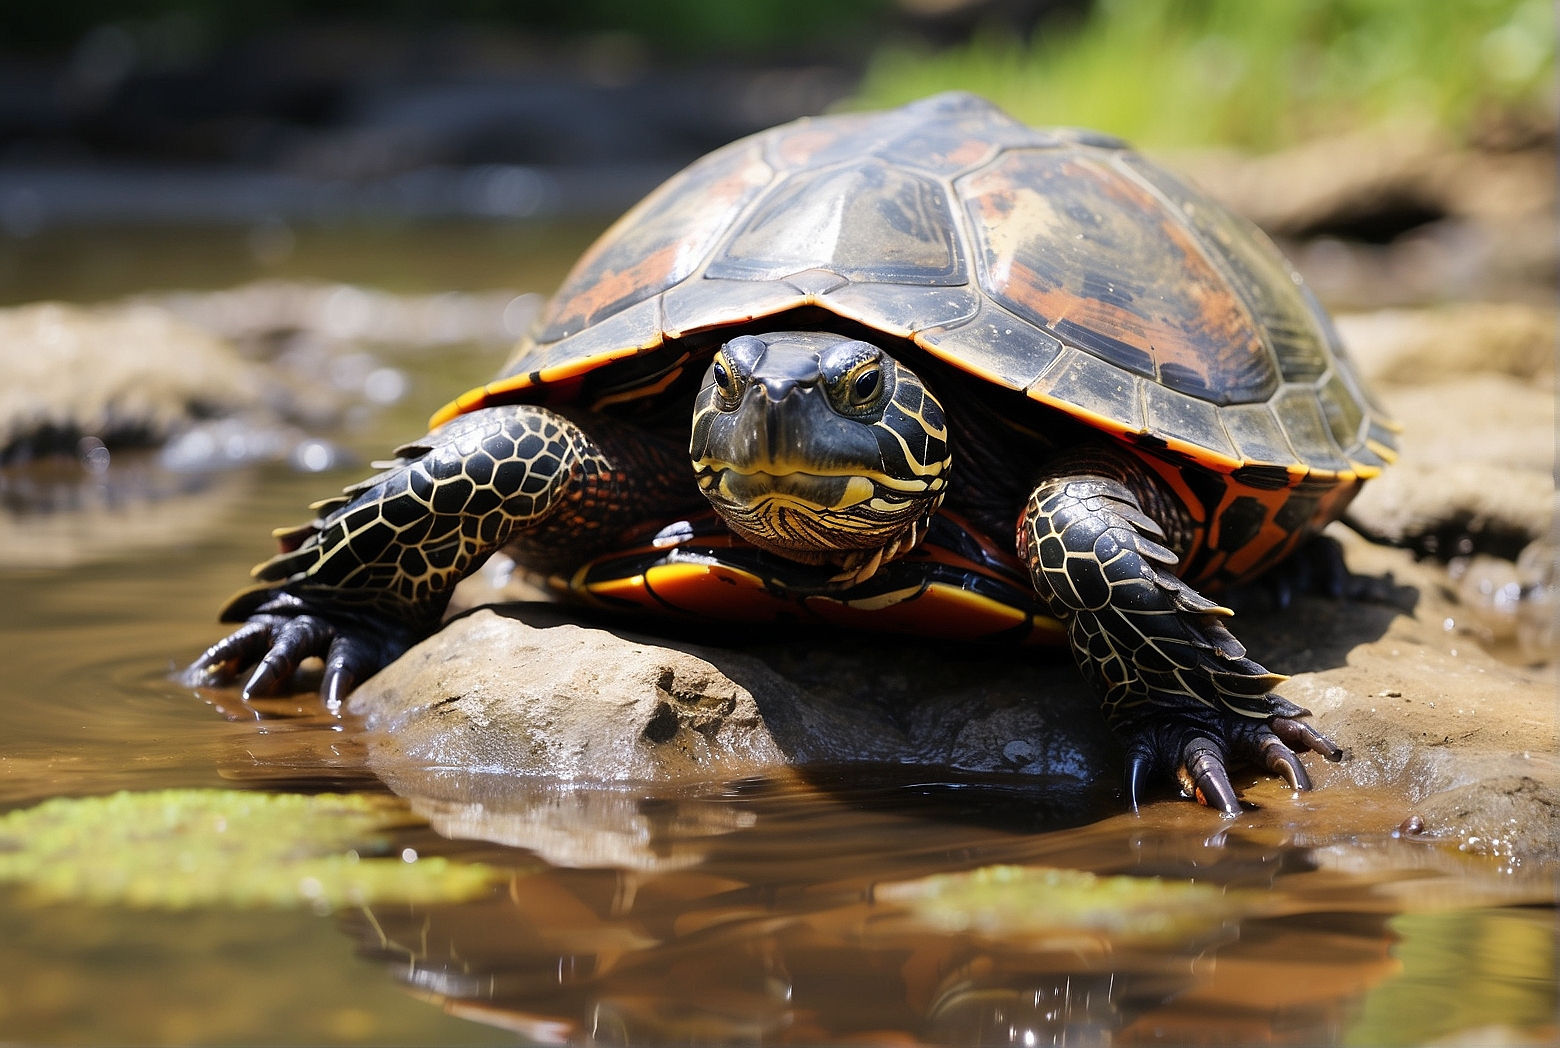 How Long Can a Painted Turtle Stay Out of Water?